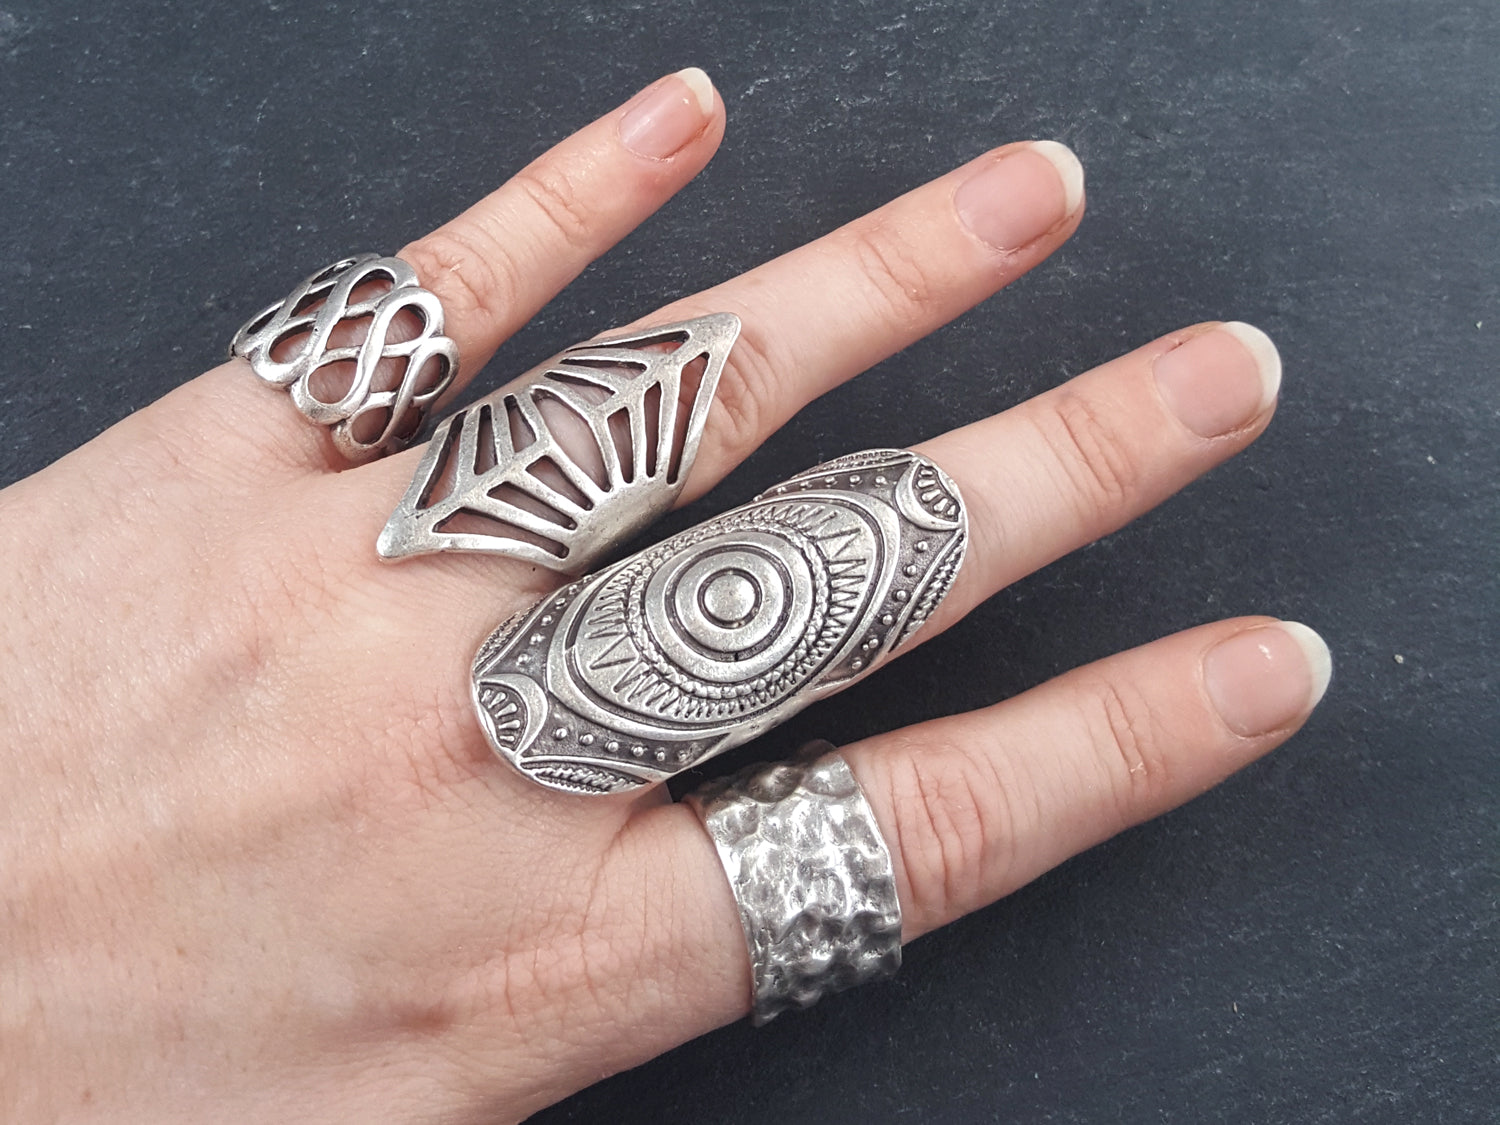 Oval Tribal Statement Silver Finger Boho - Authentic LylaSupplies Ring – Cuff Ethnic